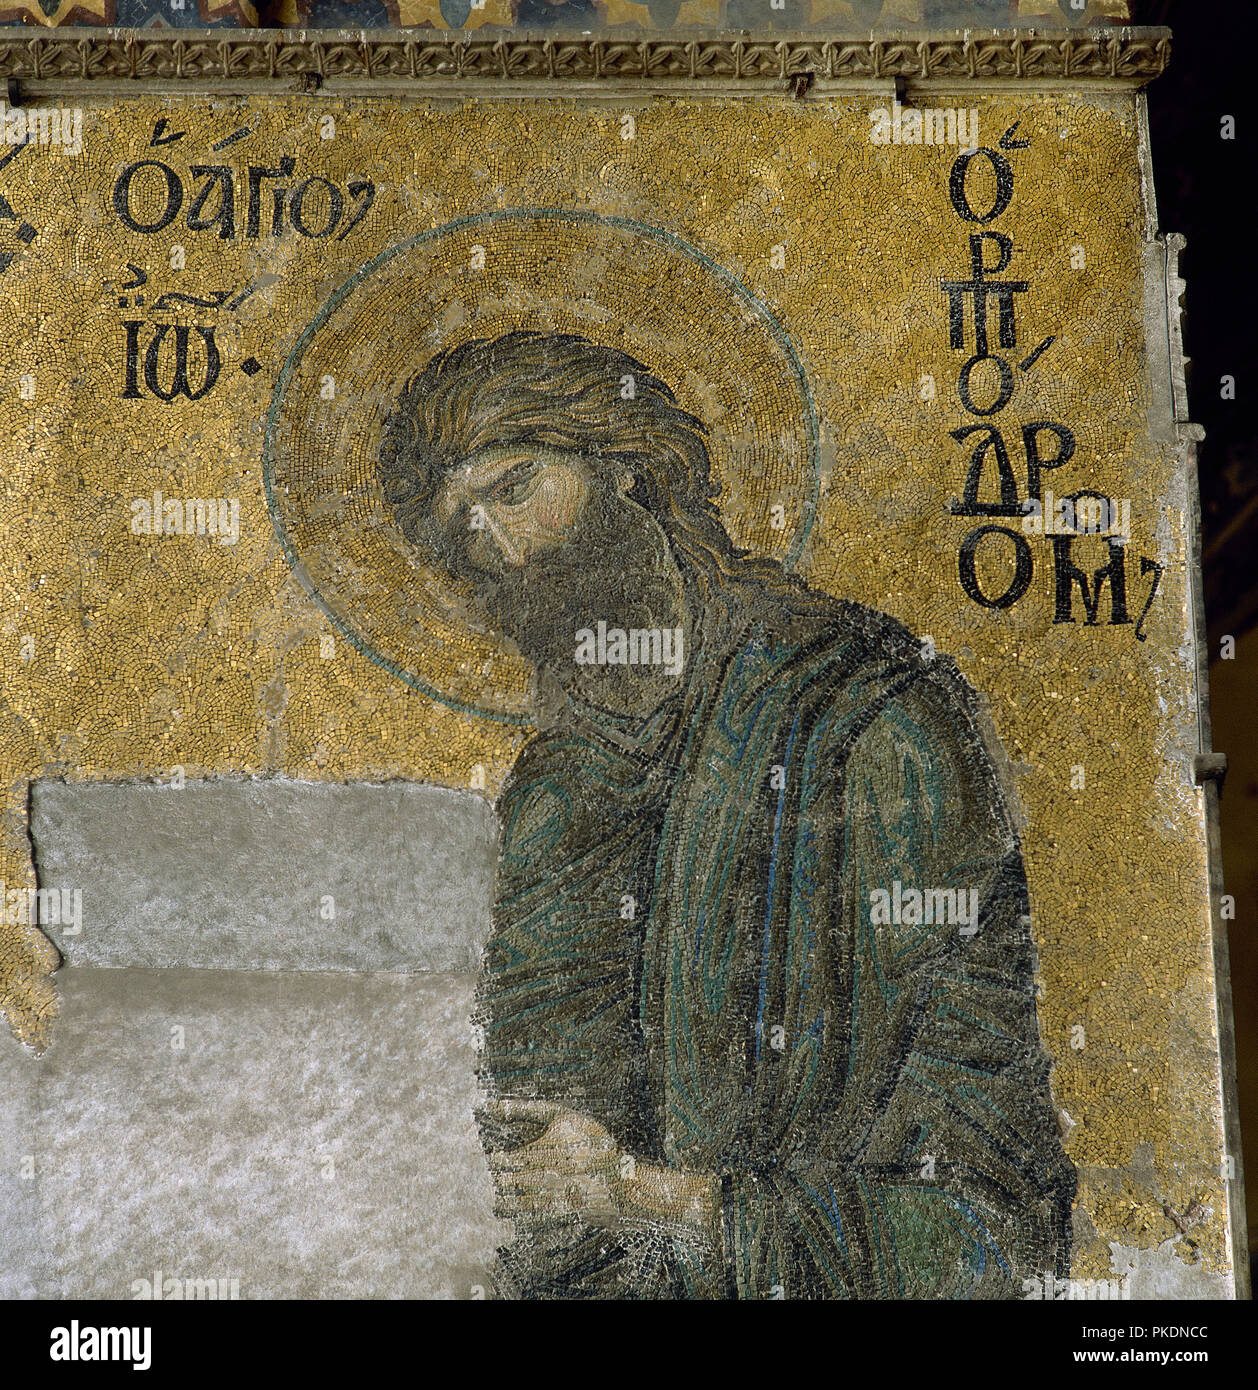 Turkey. Istambul. Hagia Sofia. Byzantine mosaic icon of St. John the Baptist. 12th century. Detail of Deesis mosaic in the South Gallery. Stock Photo